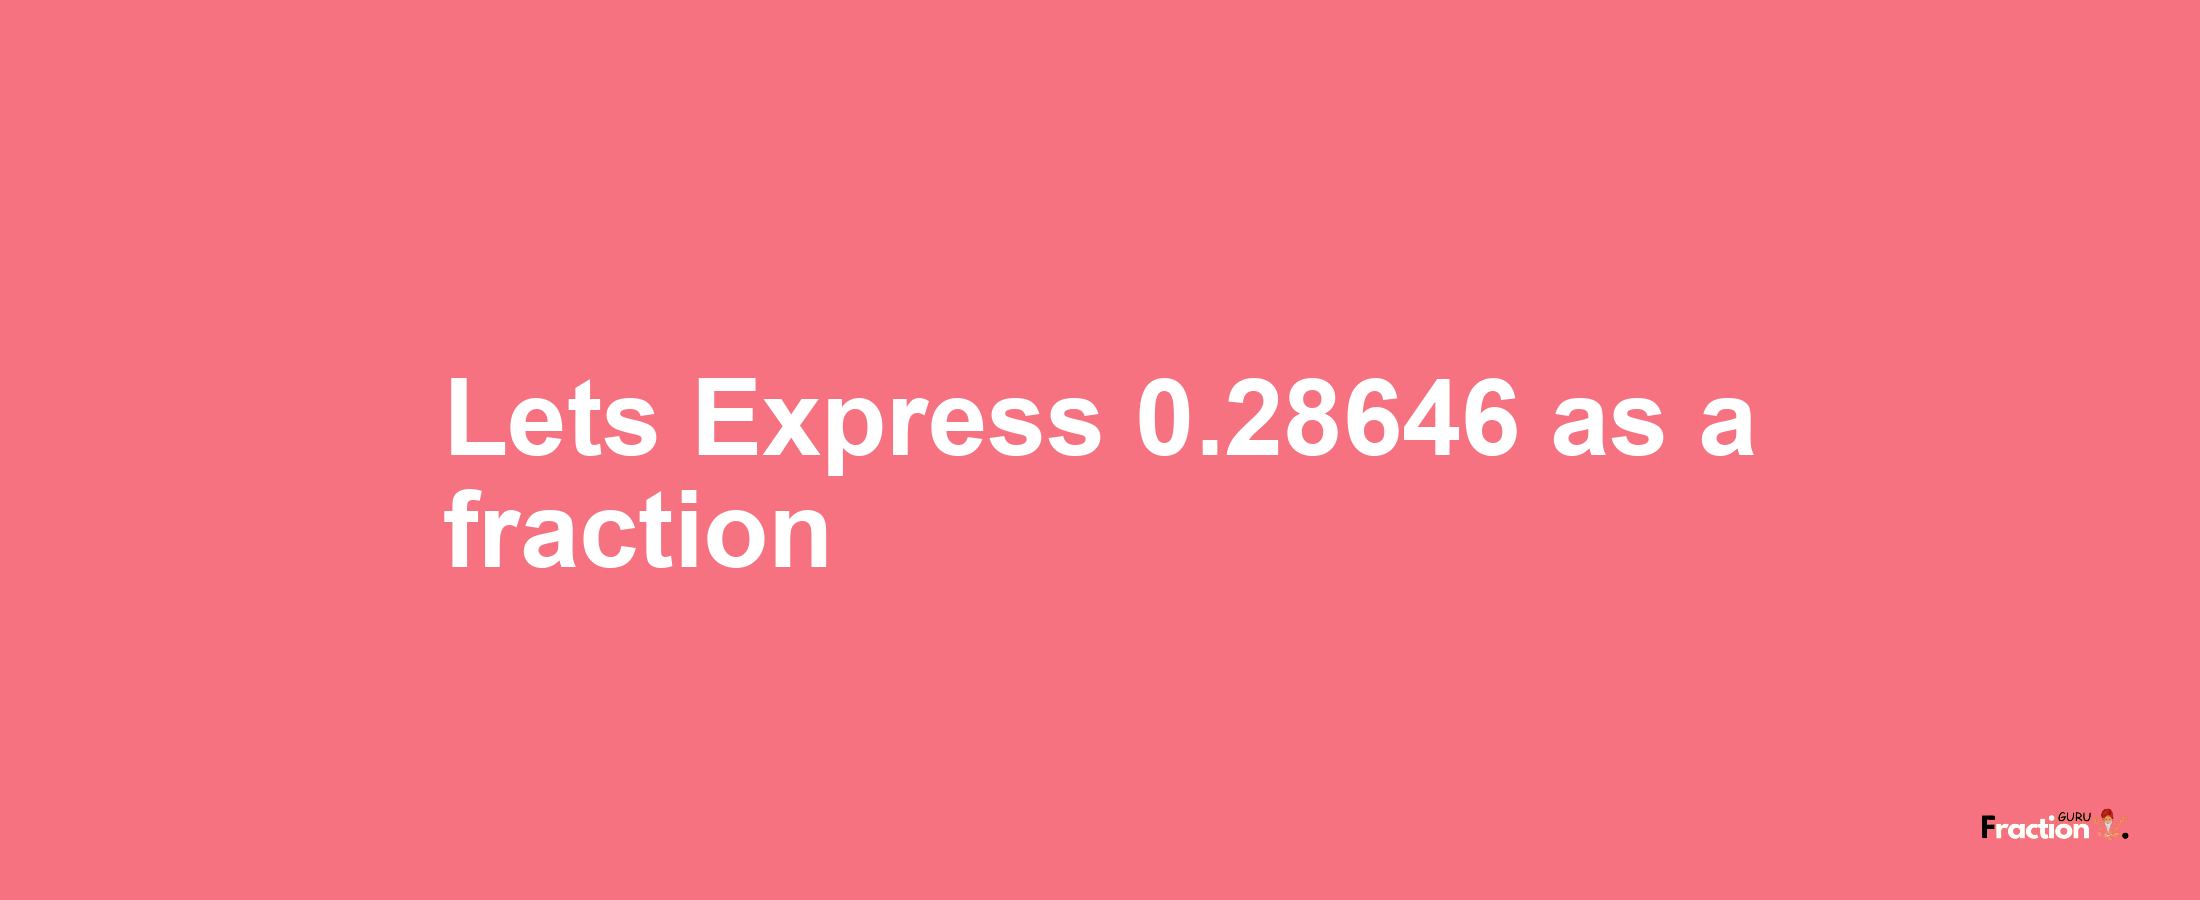 Lets Express 0.28646 as afraction